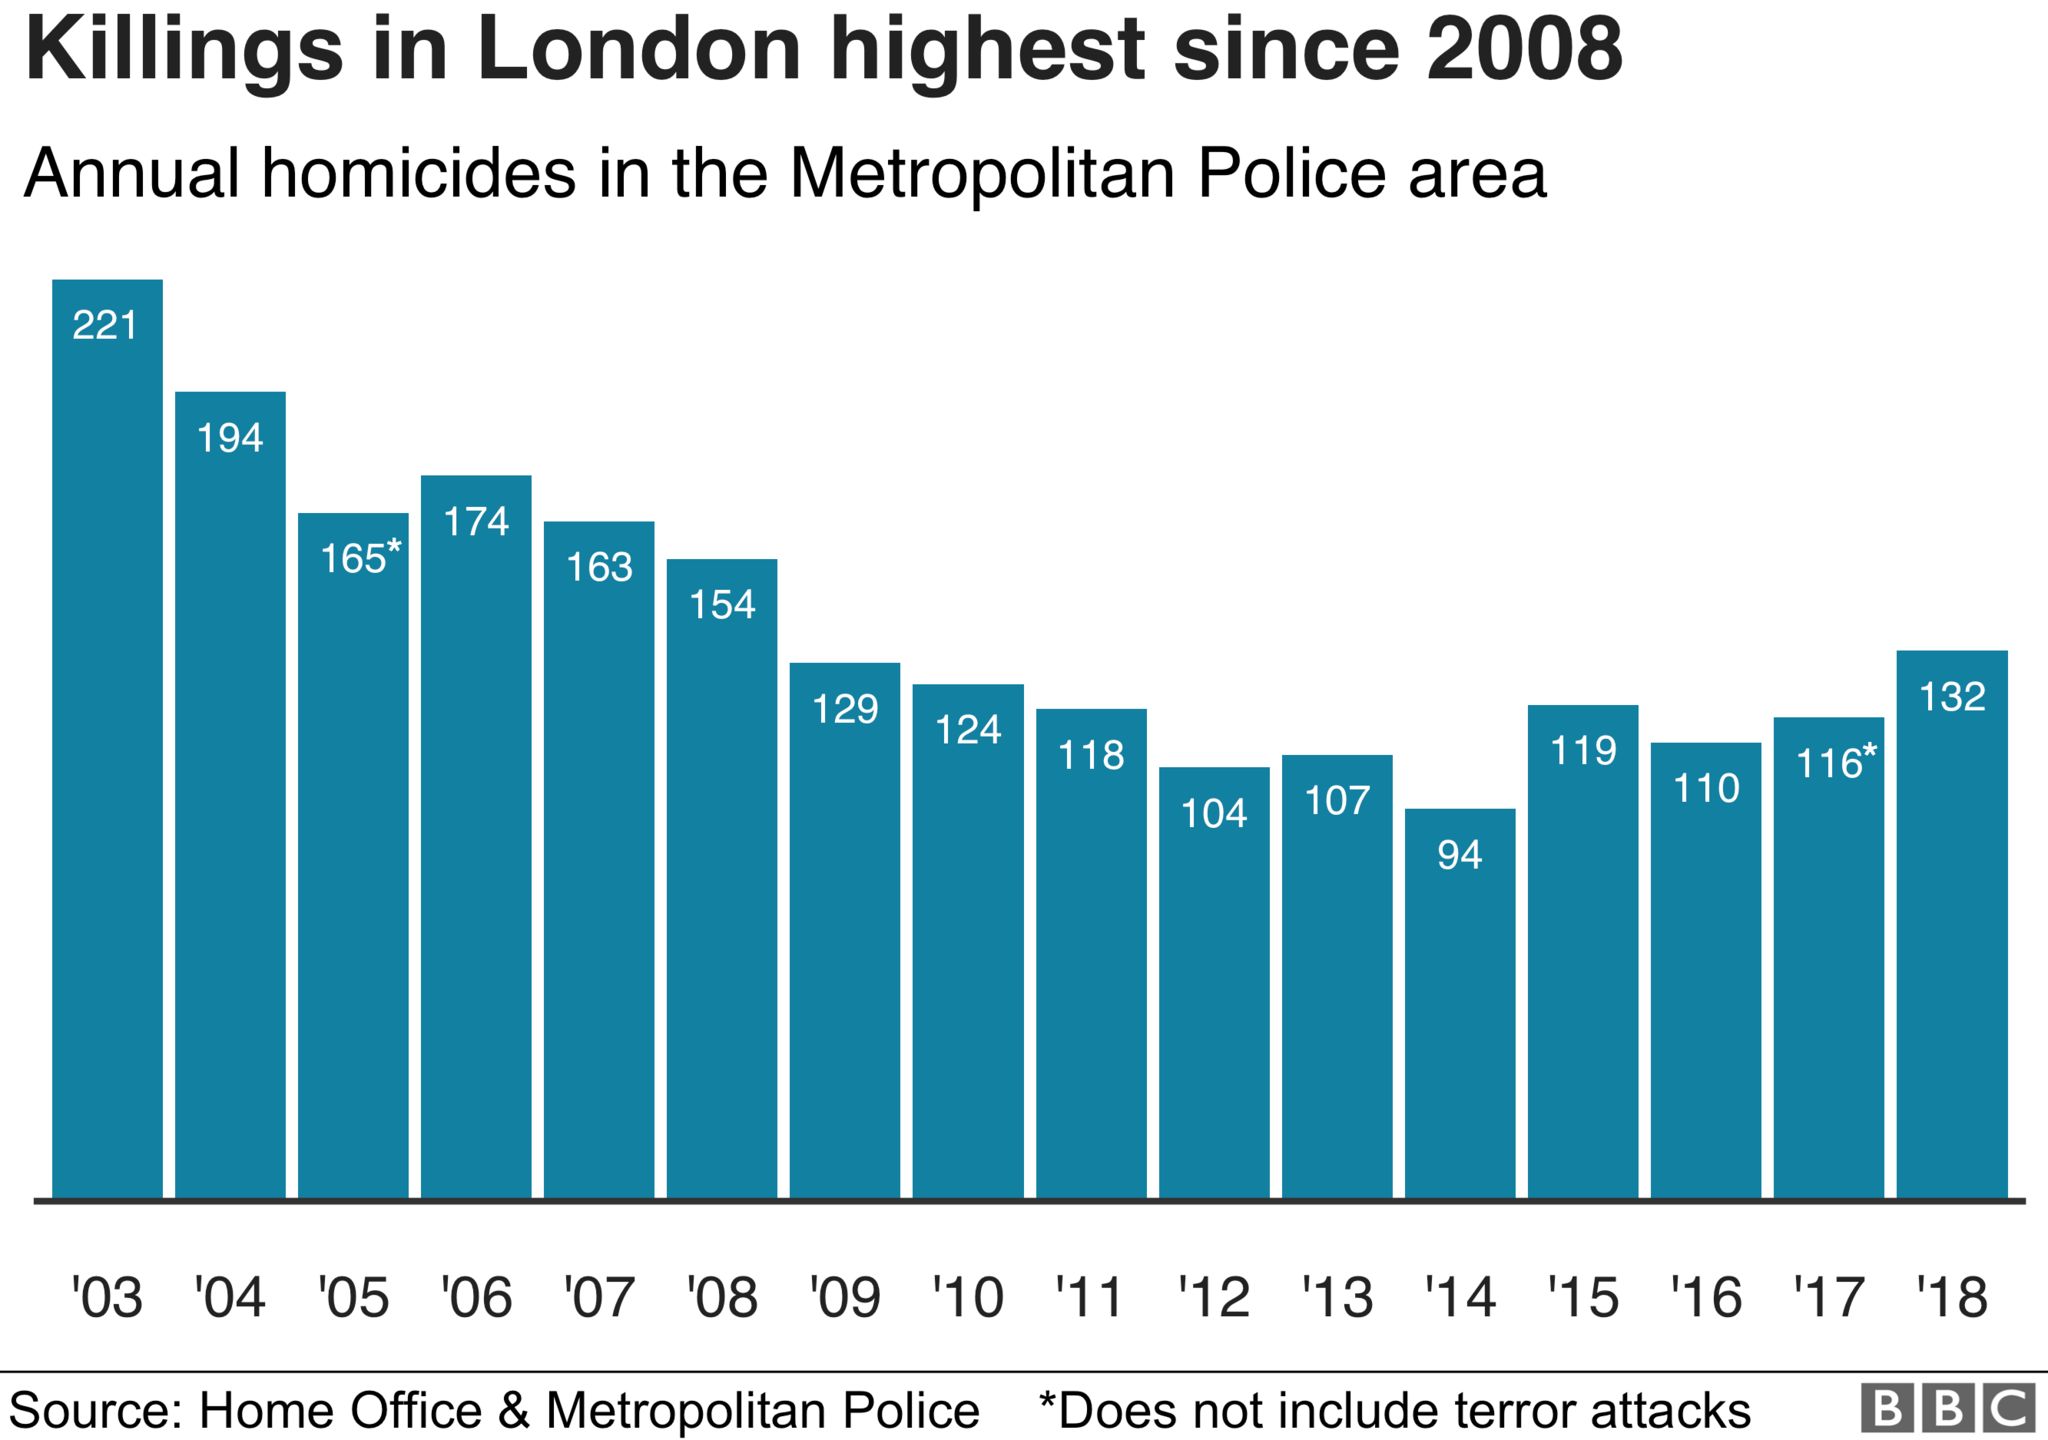 Data pic of London homicides